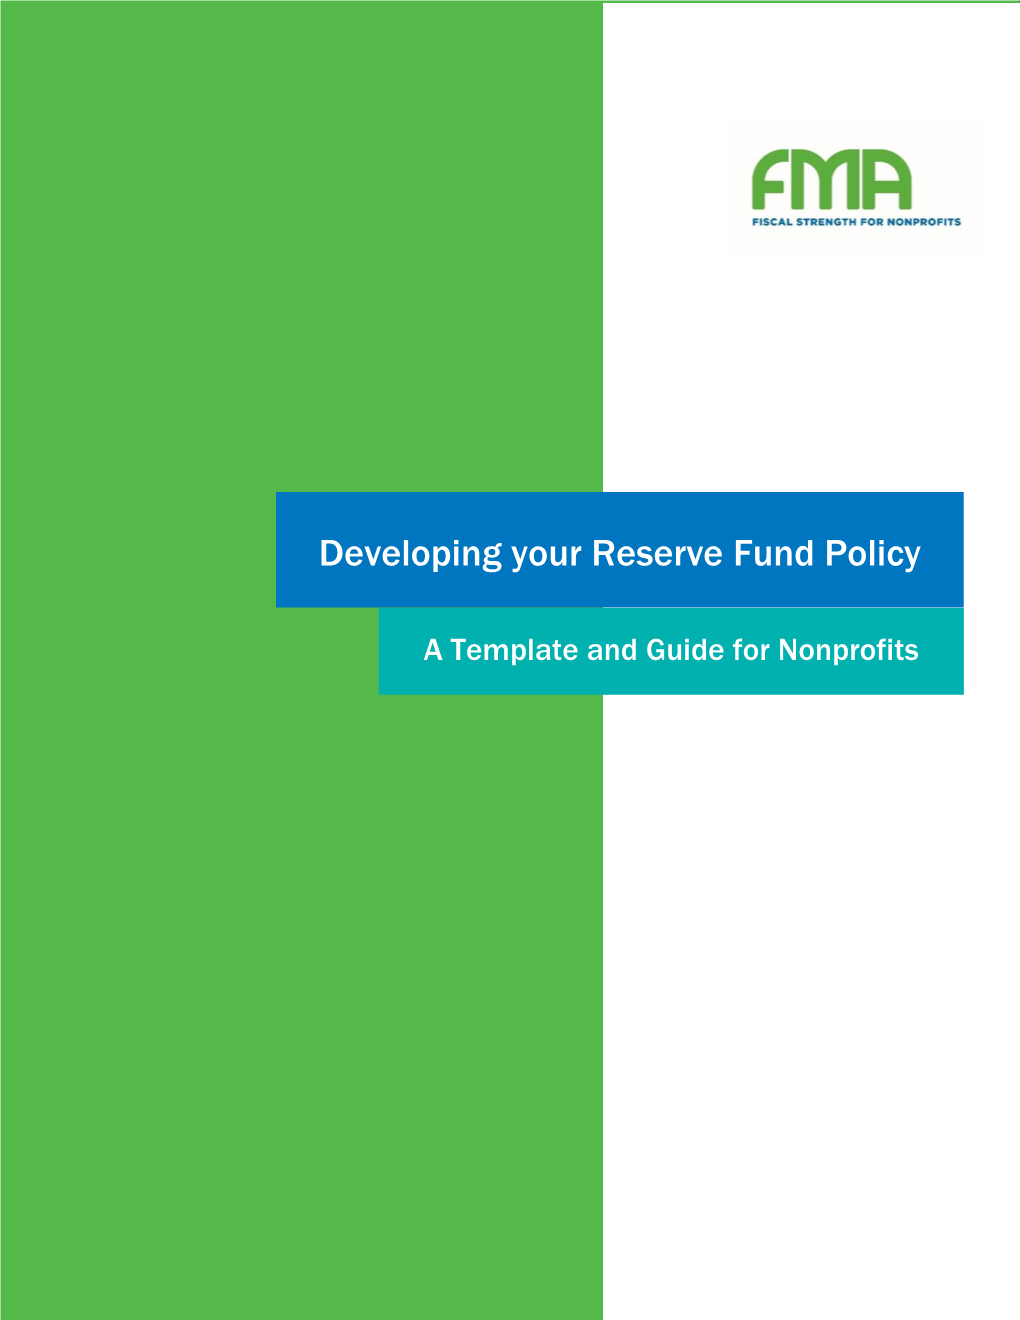 Reserve Fund Policy Template, a Blueprint for Your Organization’S Policy